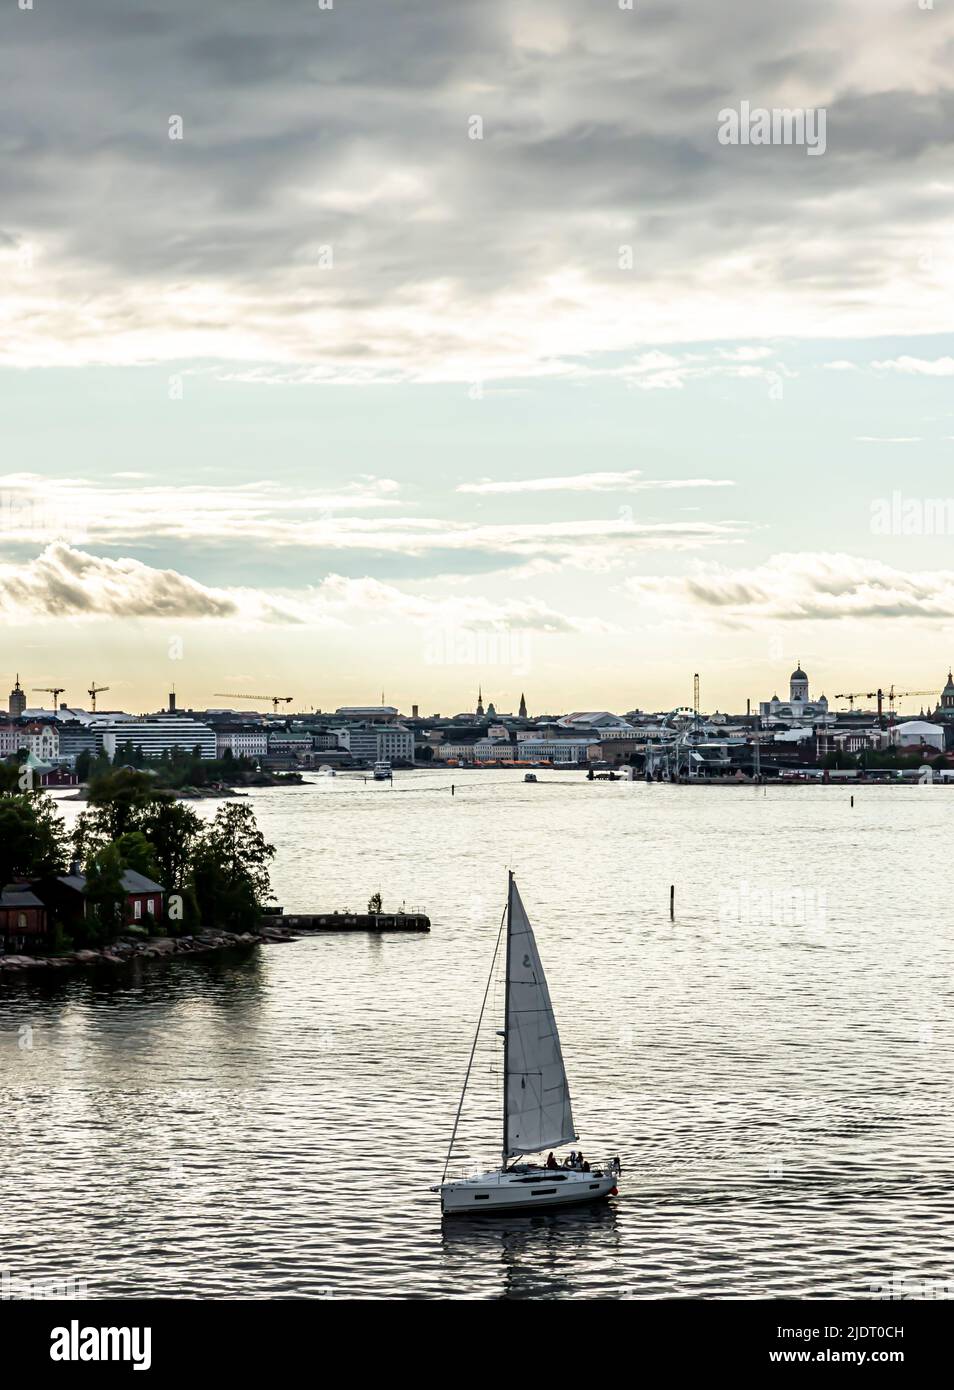 The South Harbour of Helsinki on a summer evening. A sailing boat in the foreground. Downtown Helsinki in the background. Room for text. Stock Photo